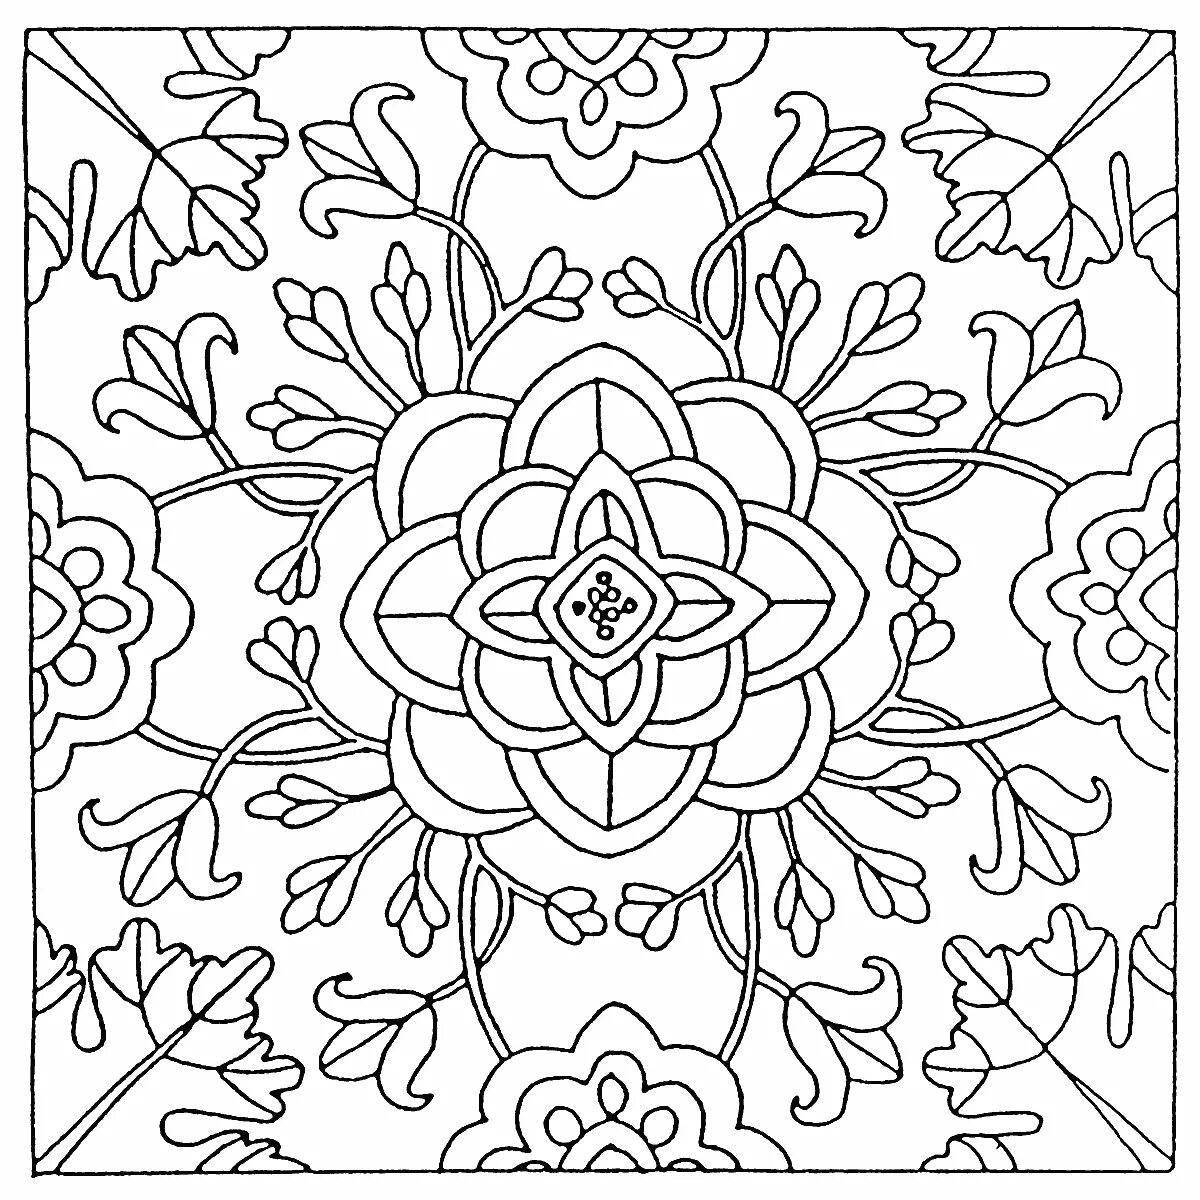 Colourful pavlovian scarf coloring pages for kids